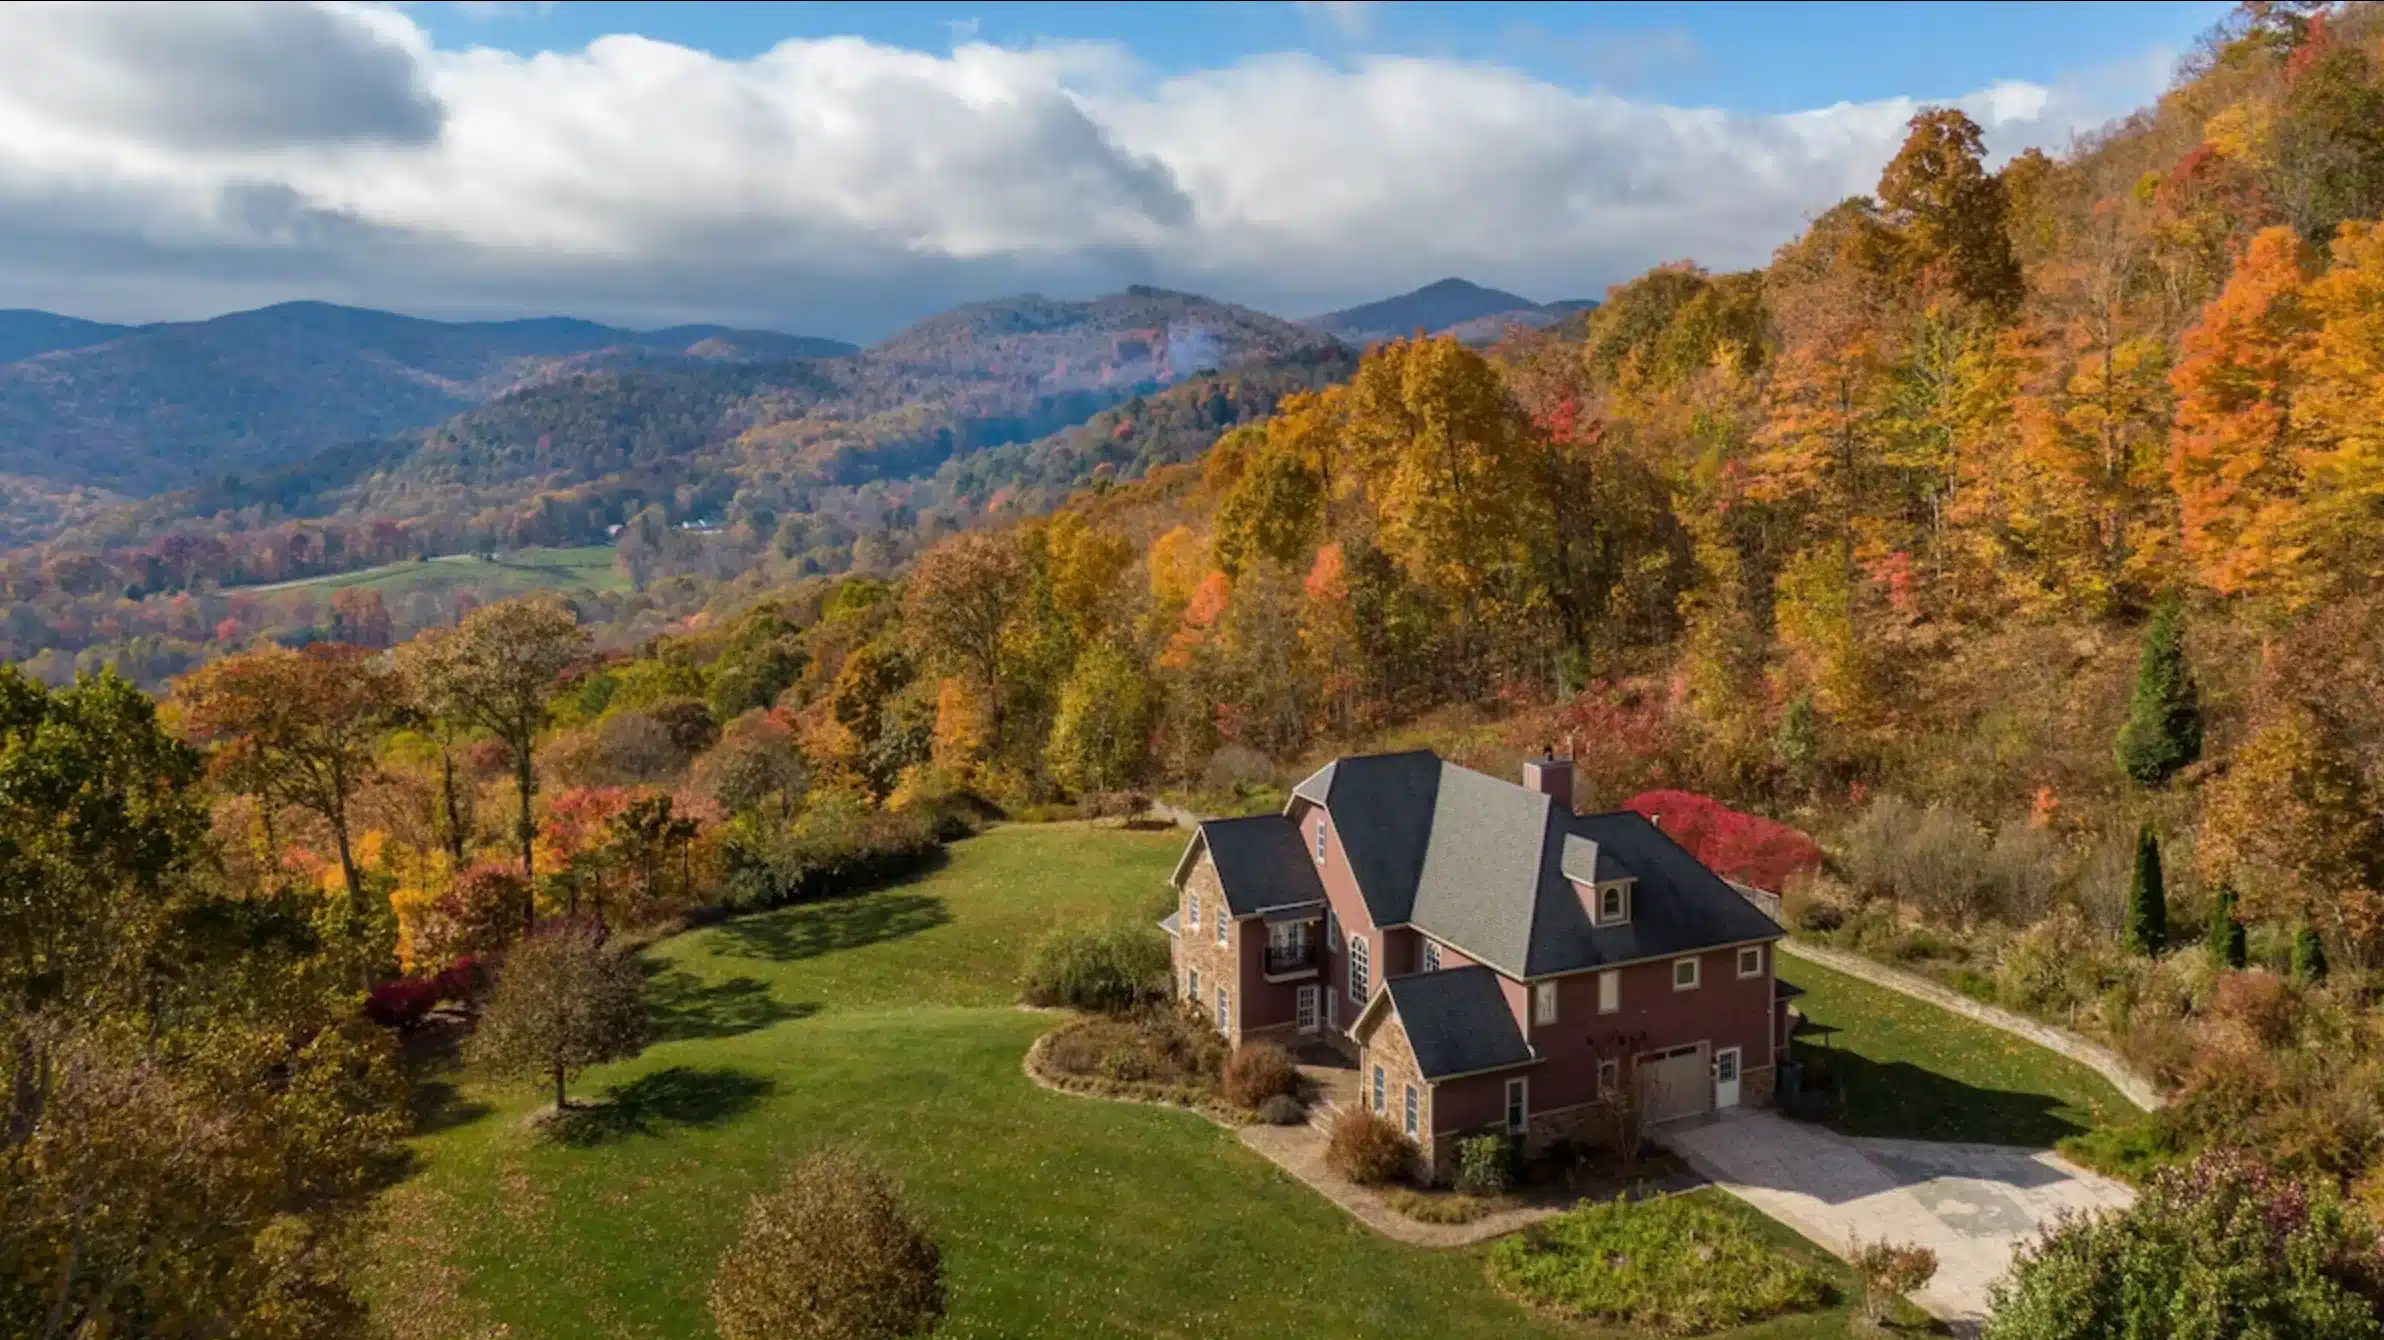 Find the best last minute vacation rentals on Whimstay including this affordable cabin rental in the woods surrounded by fall colors and lush landscaping